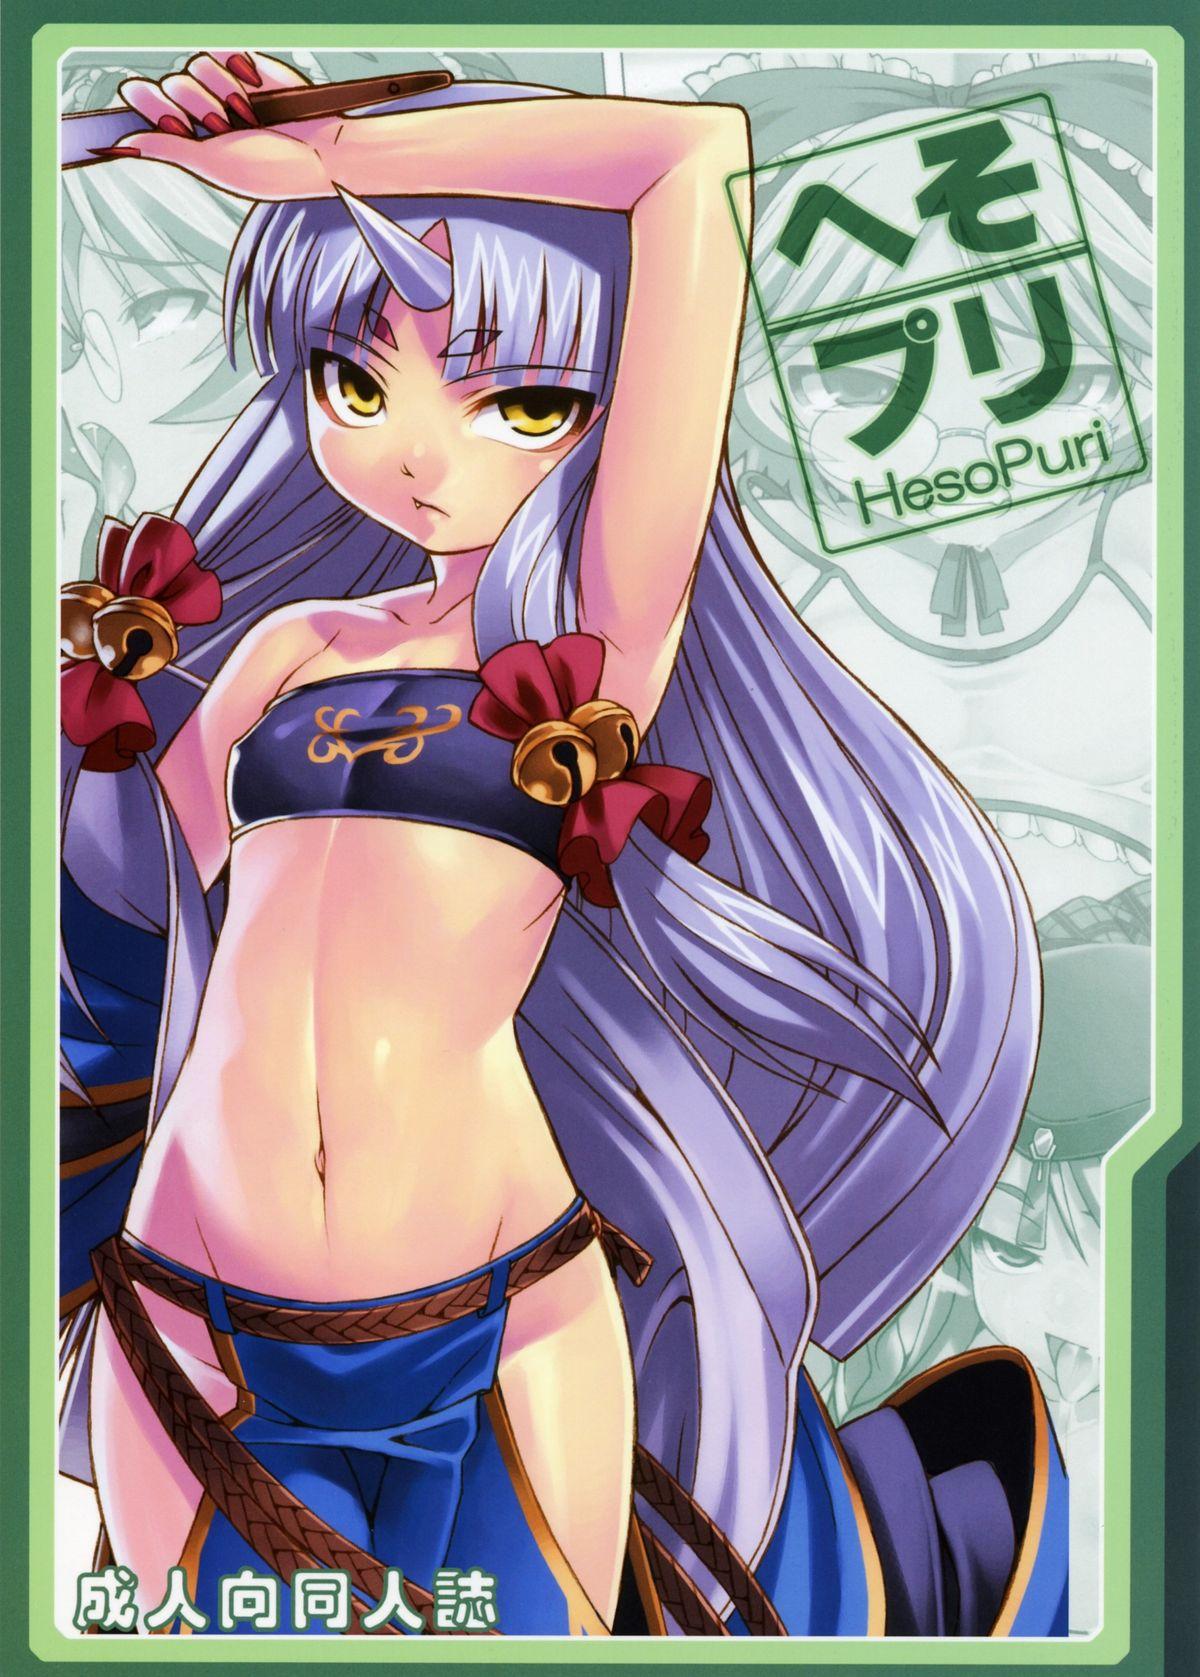 Hugetits HesoPuri - Super robot wars Endless frontier Pica - Picture 1